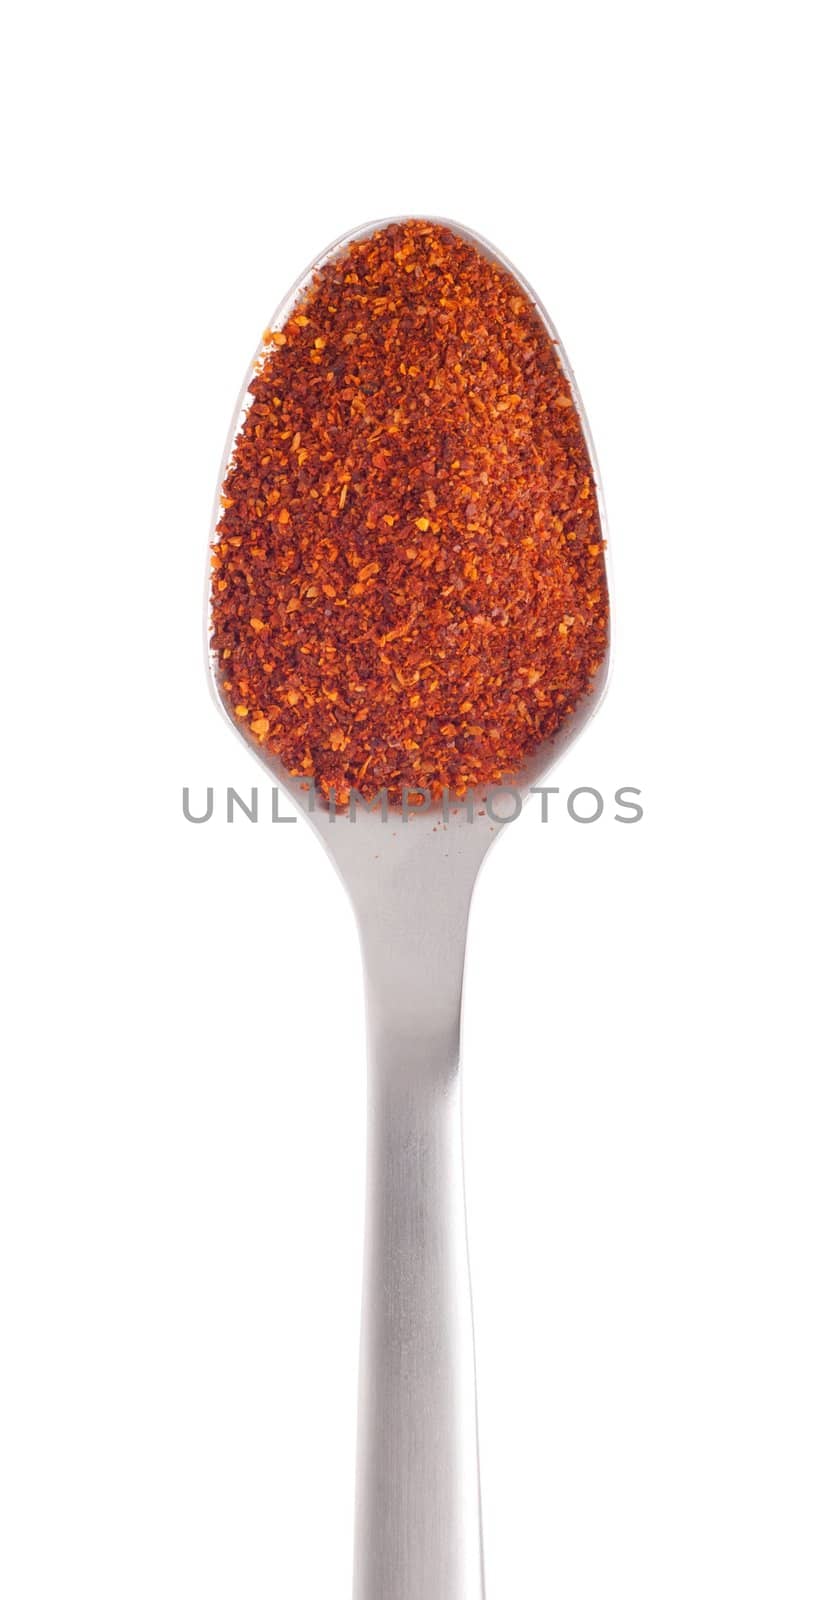 piri-piri flakes spice on a stainless steel spoon, isolated on white background